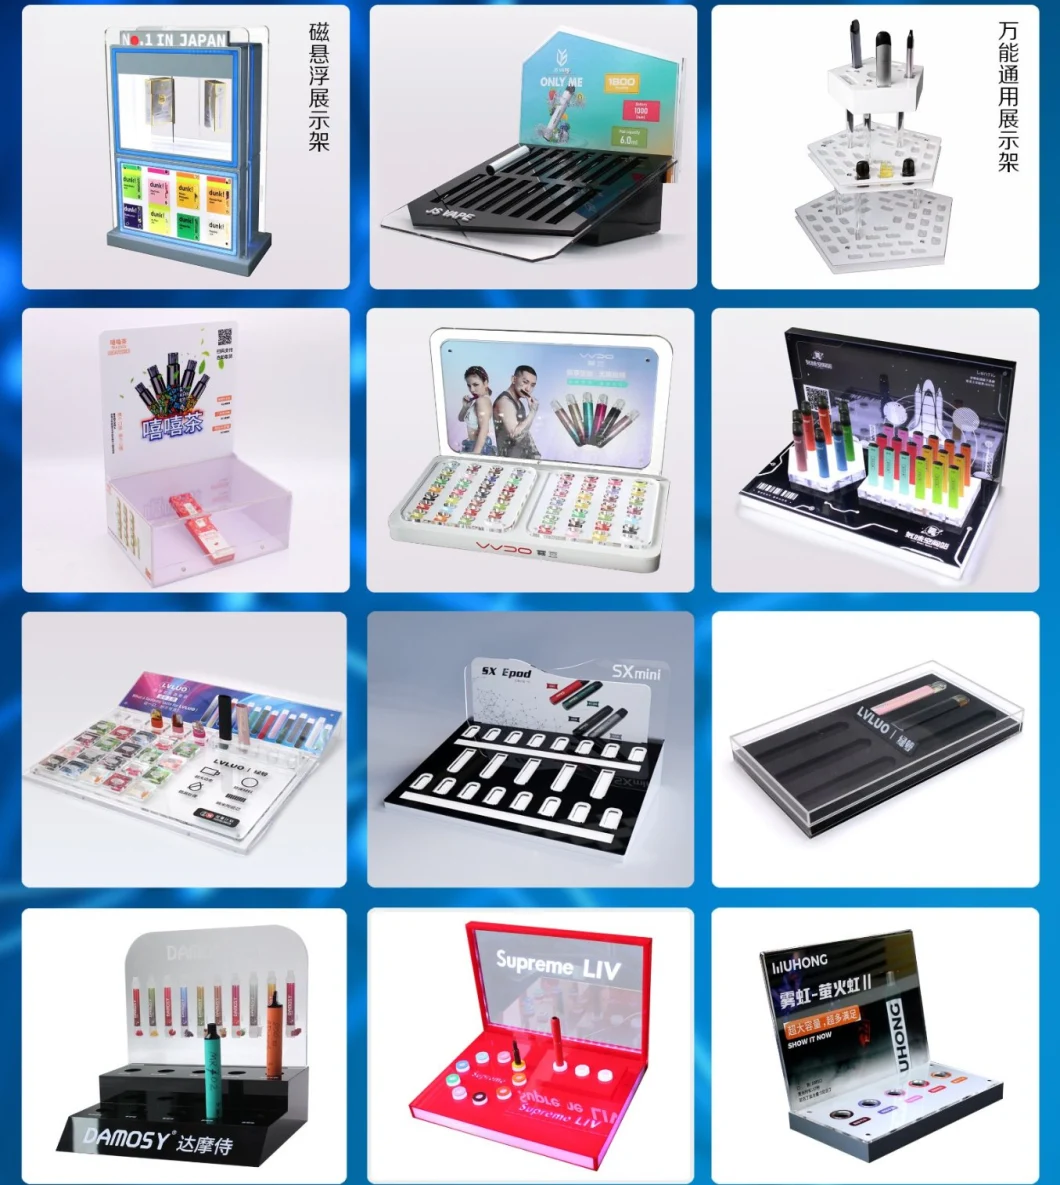 Popular Acrylic Display Products Electronic Cigarette Display Rack with LED for Retail Stores